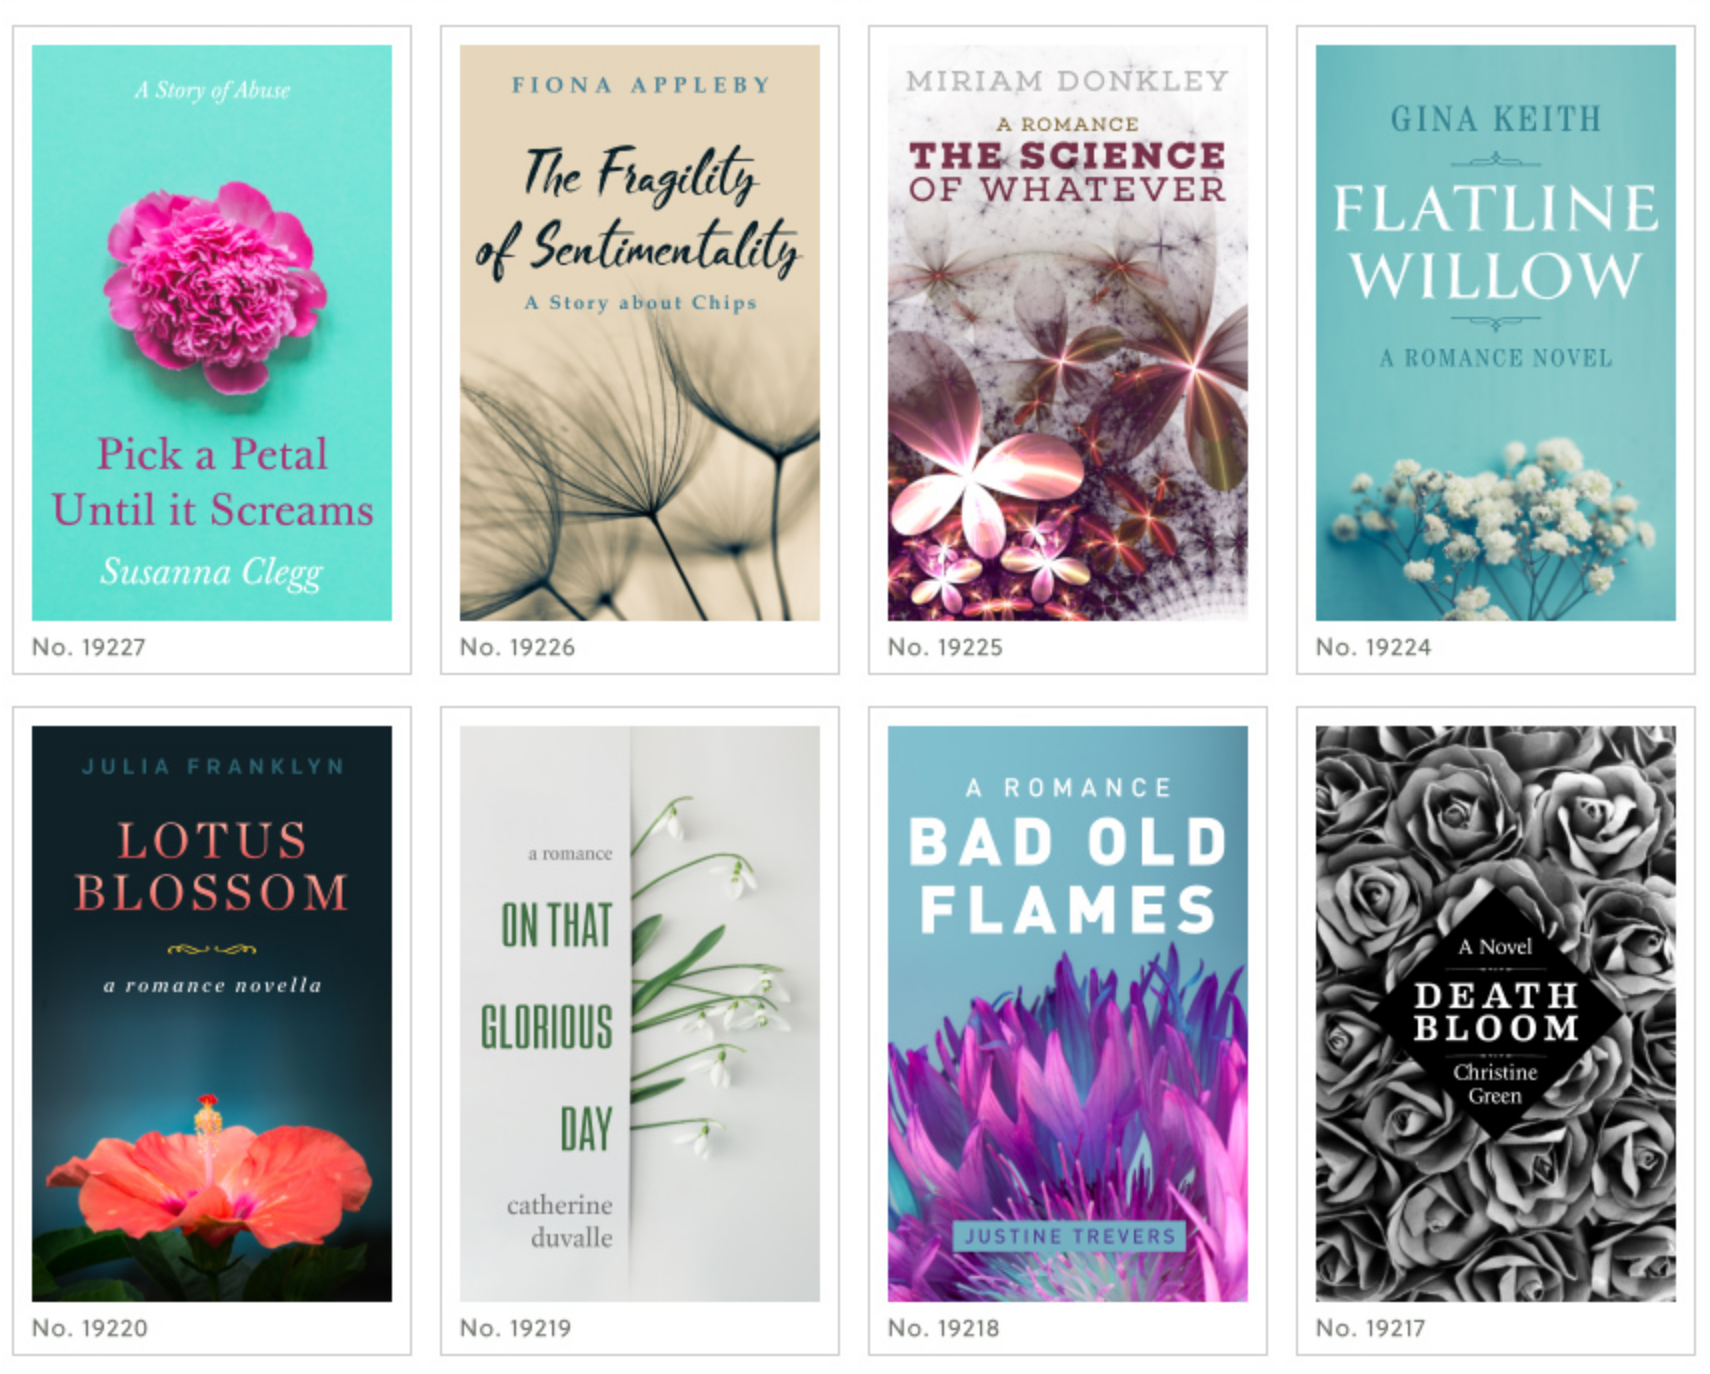 The Best Premade Cover Designers for Indie Authors